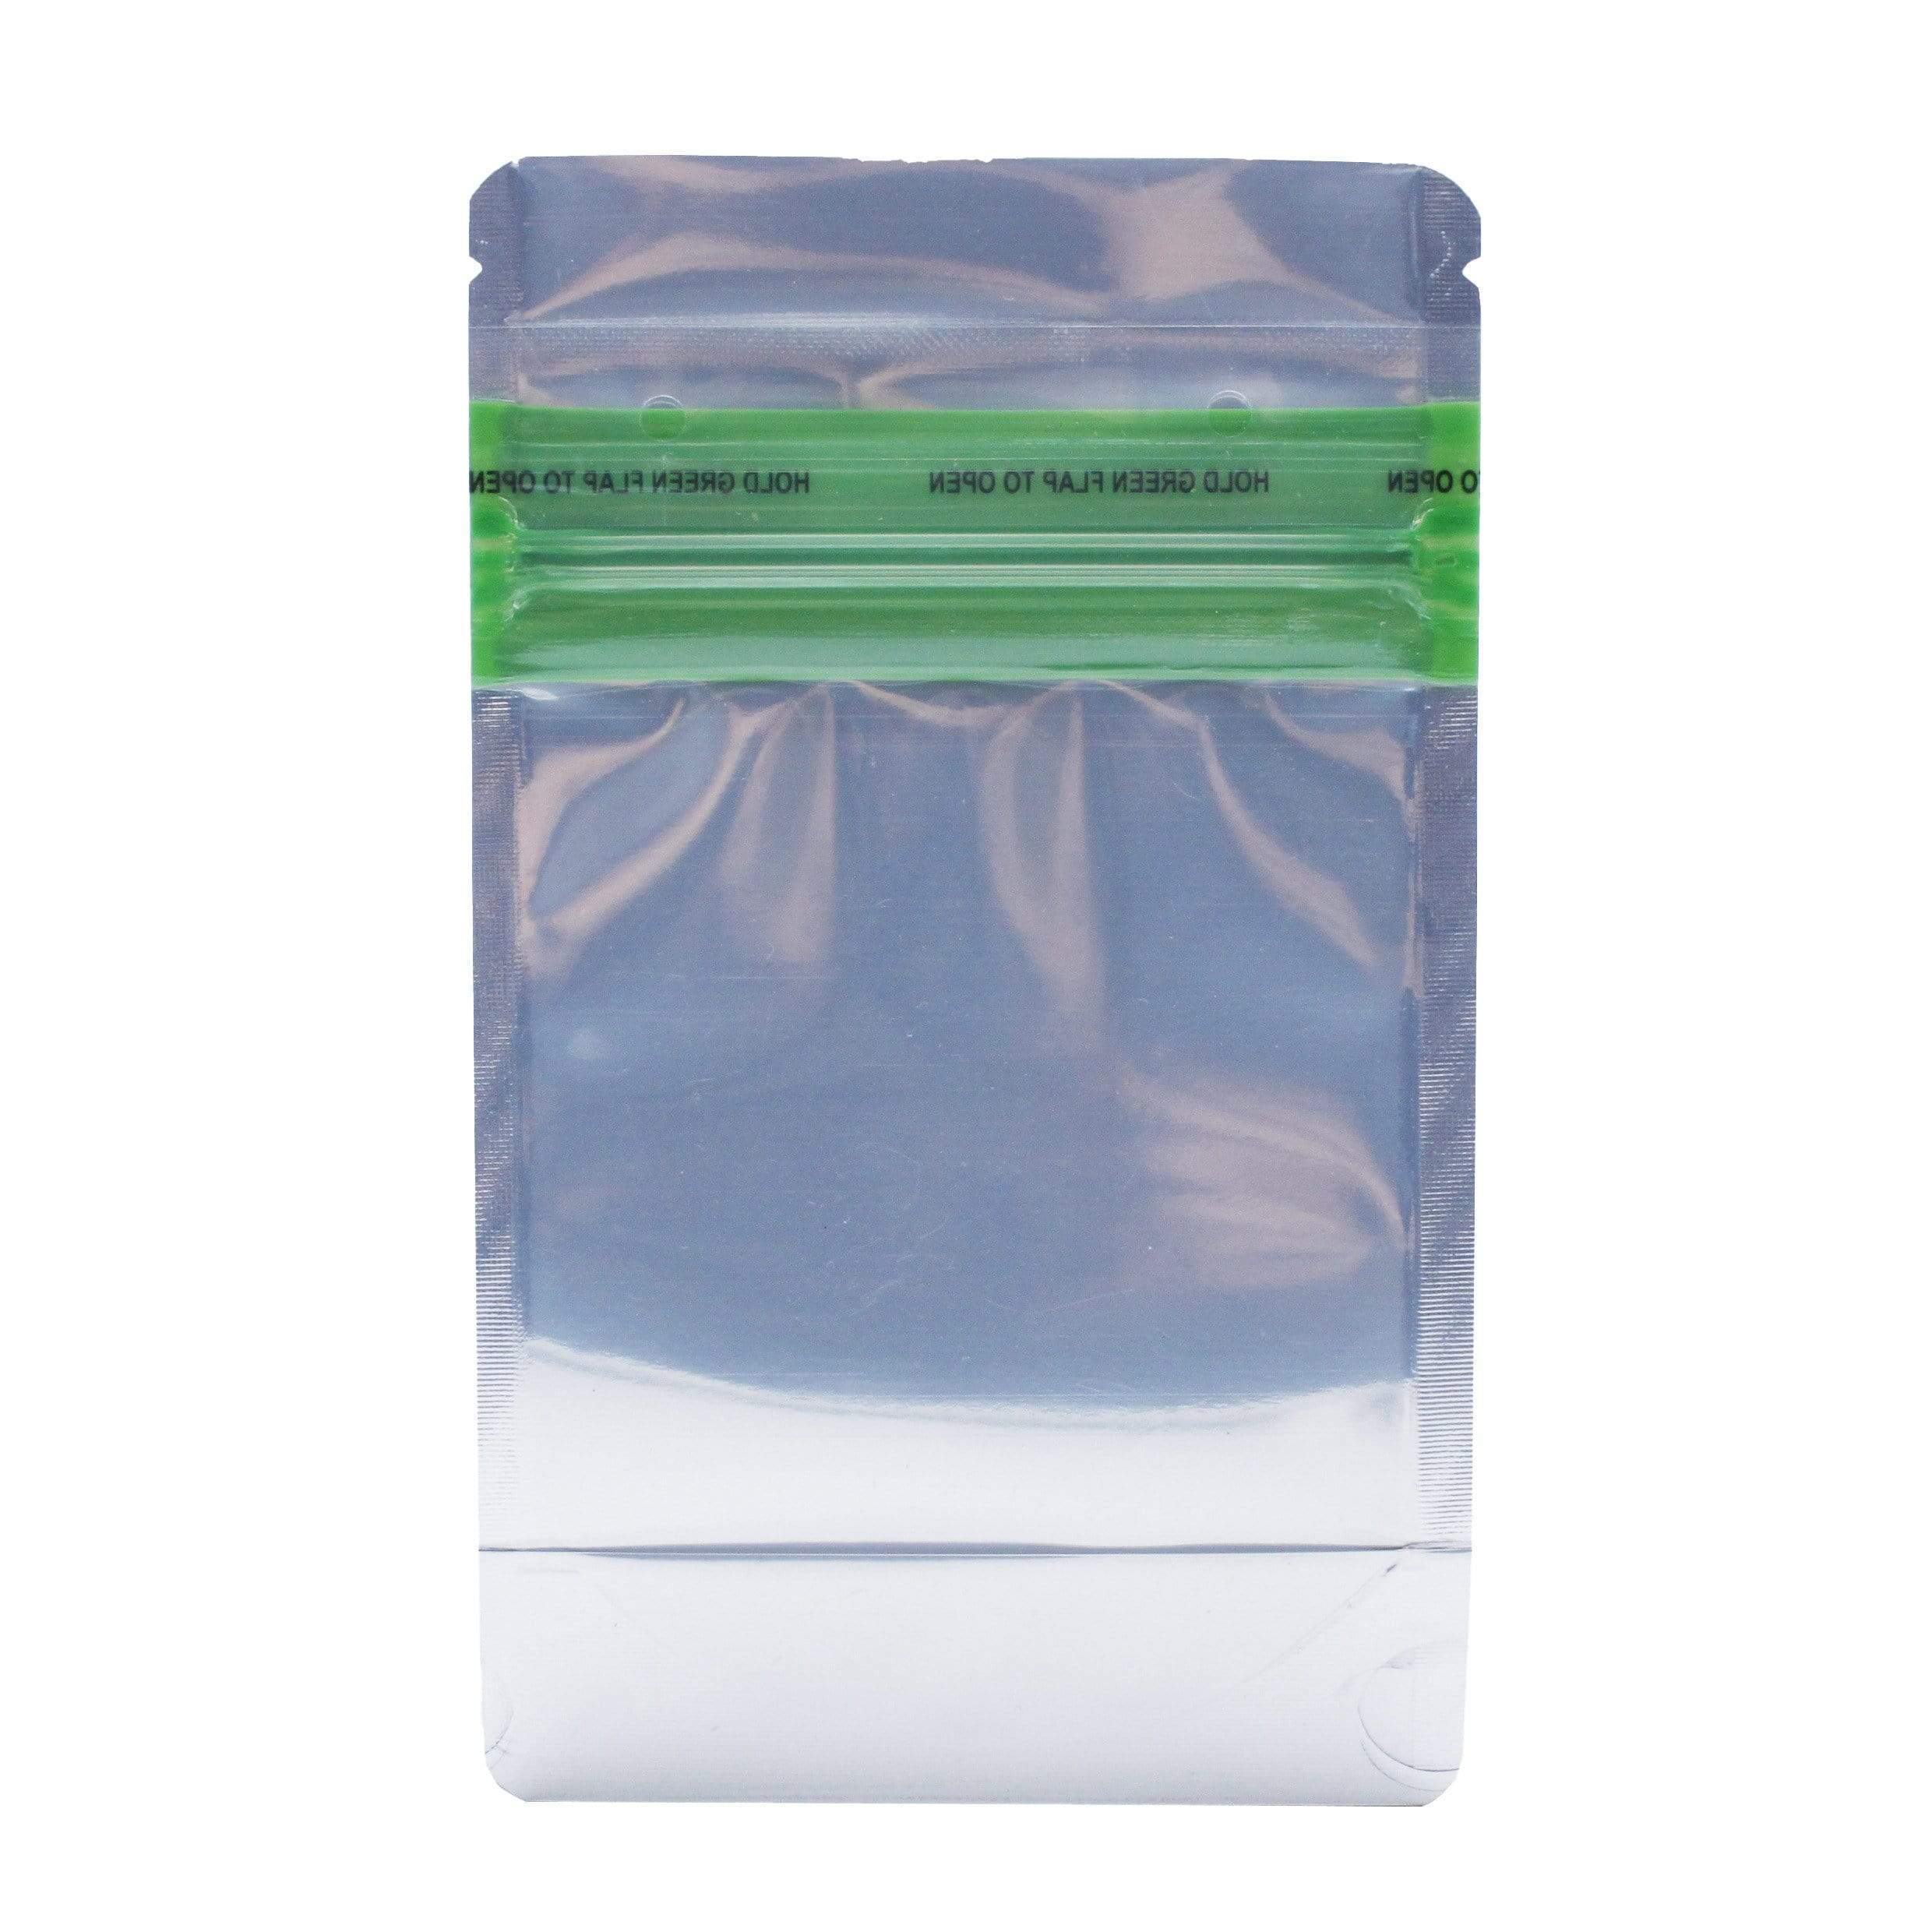 Bag King Child-Resistant Clear Front Green Zipper Bag (1/8th oz)